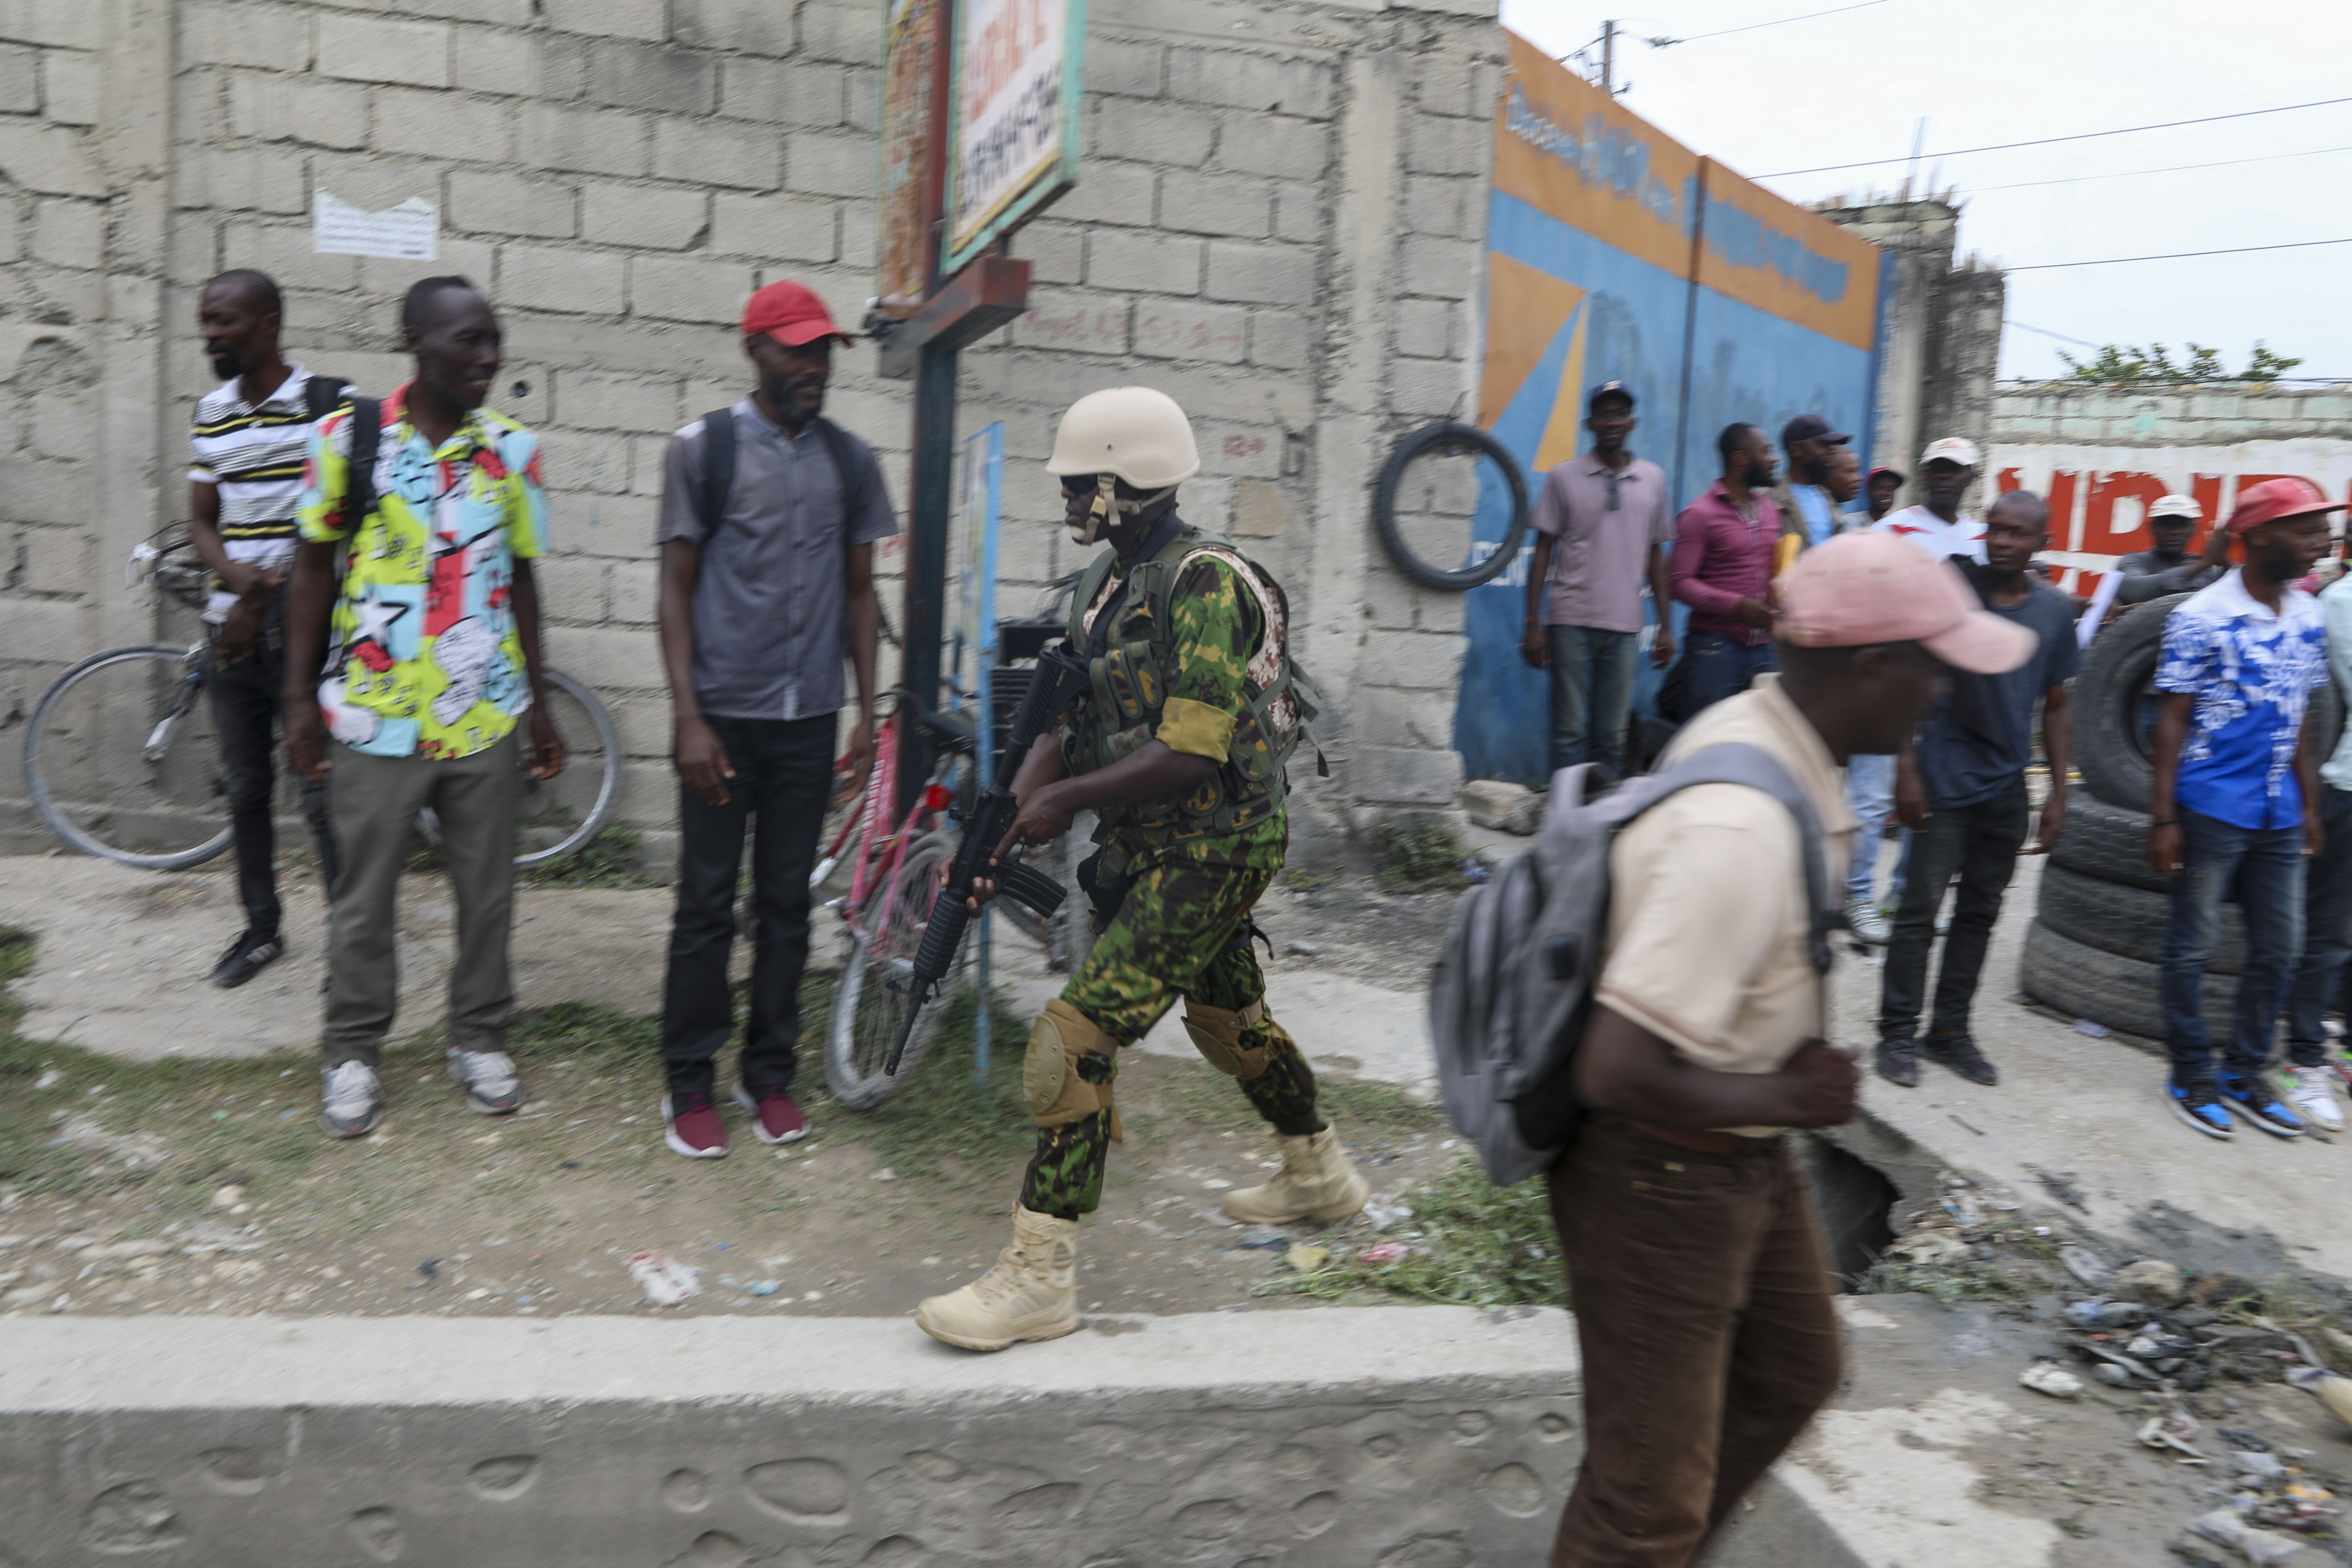 Haiti's prime minister says Kenyan police are crucial to controlling gangs, early days are positive